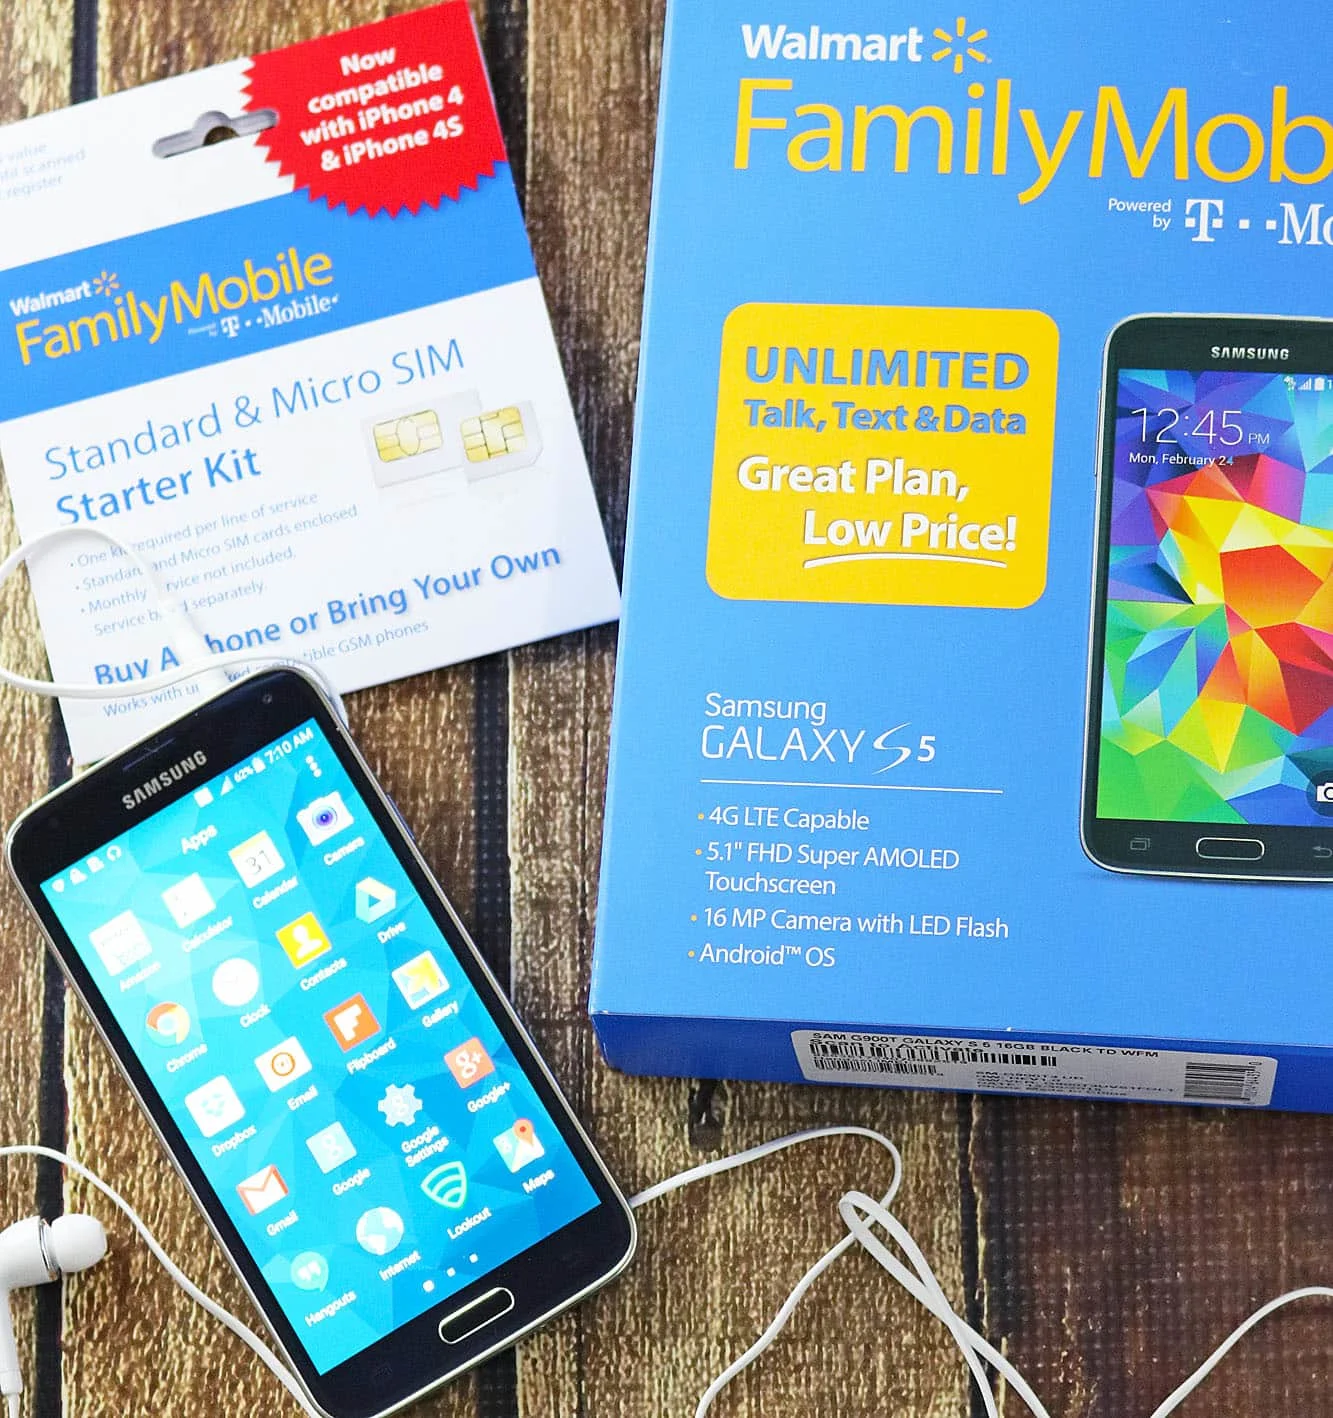 Walmart Family Mobile New 10GB of 4GLTE talk text data plan and Samsung Galaxy S5